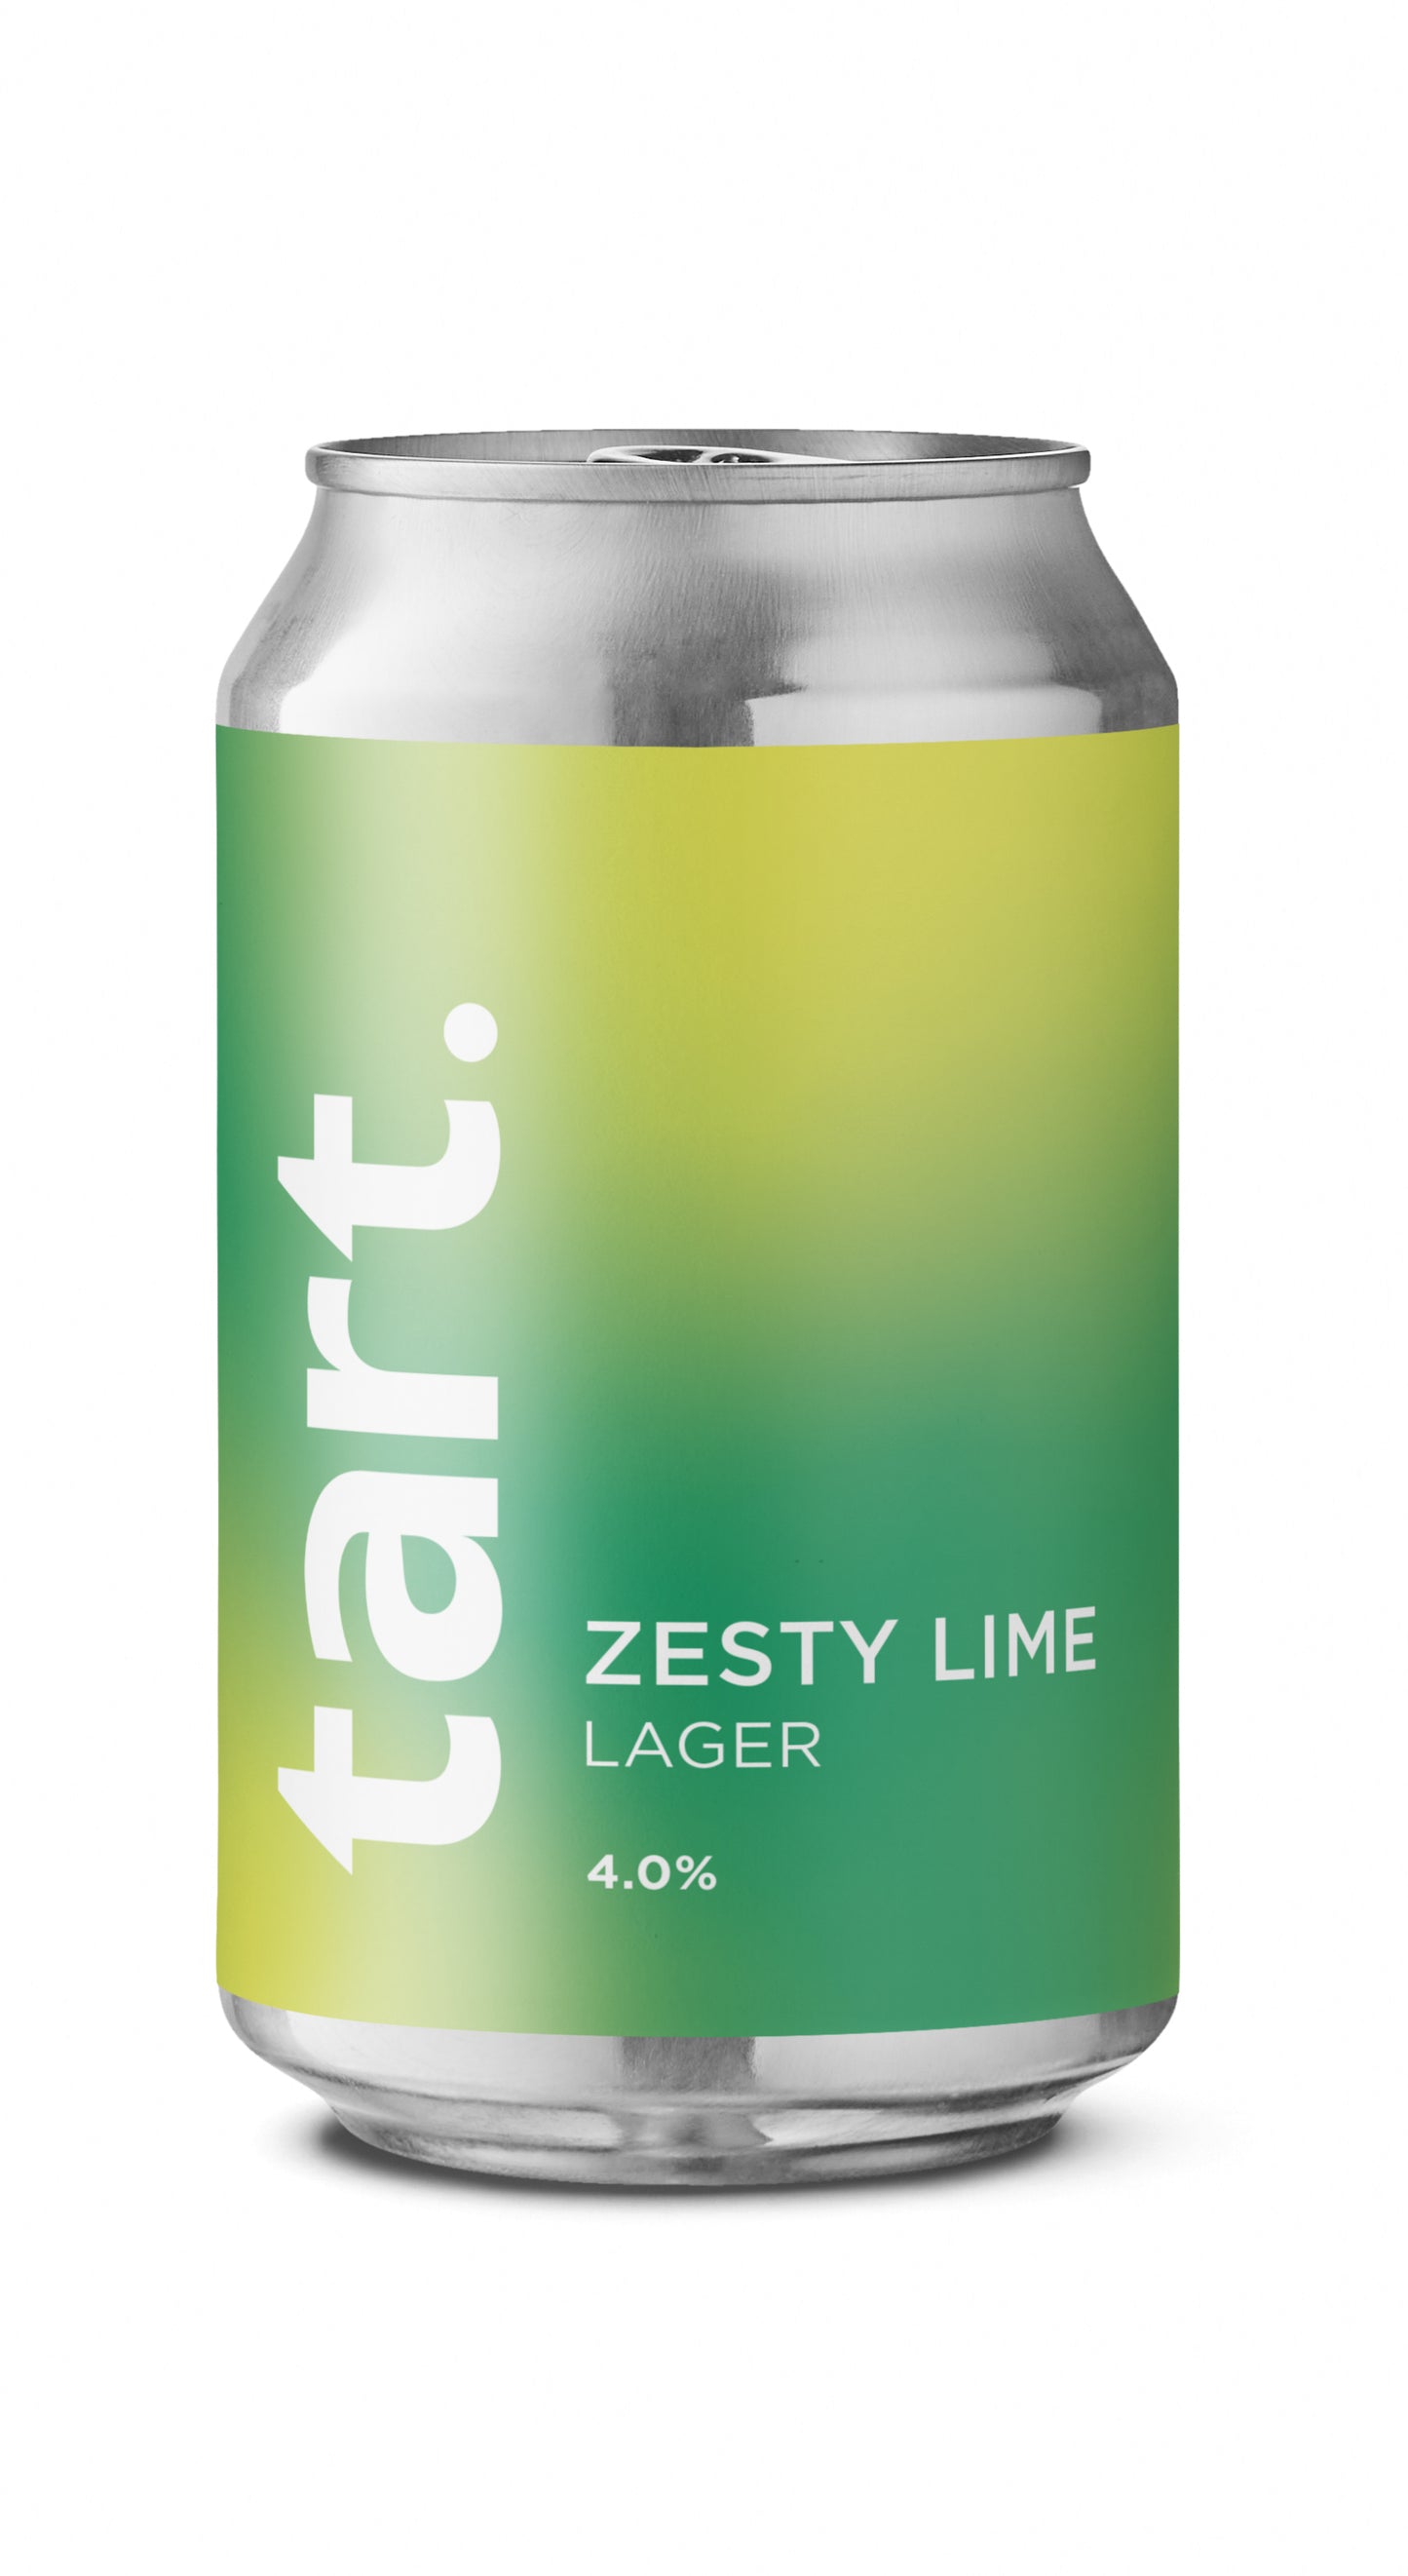 ZESTY LIME LAGER